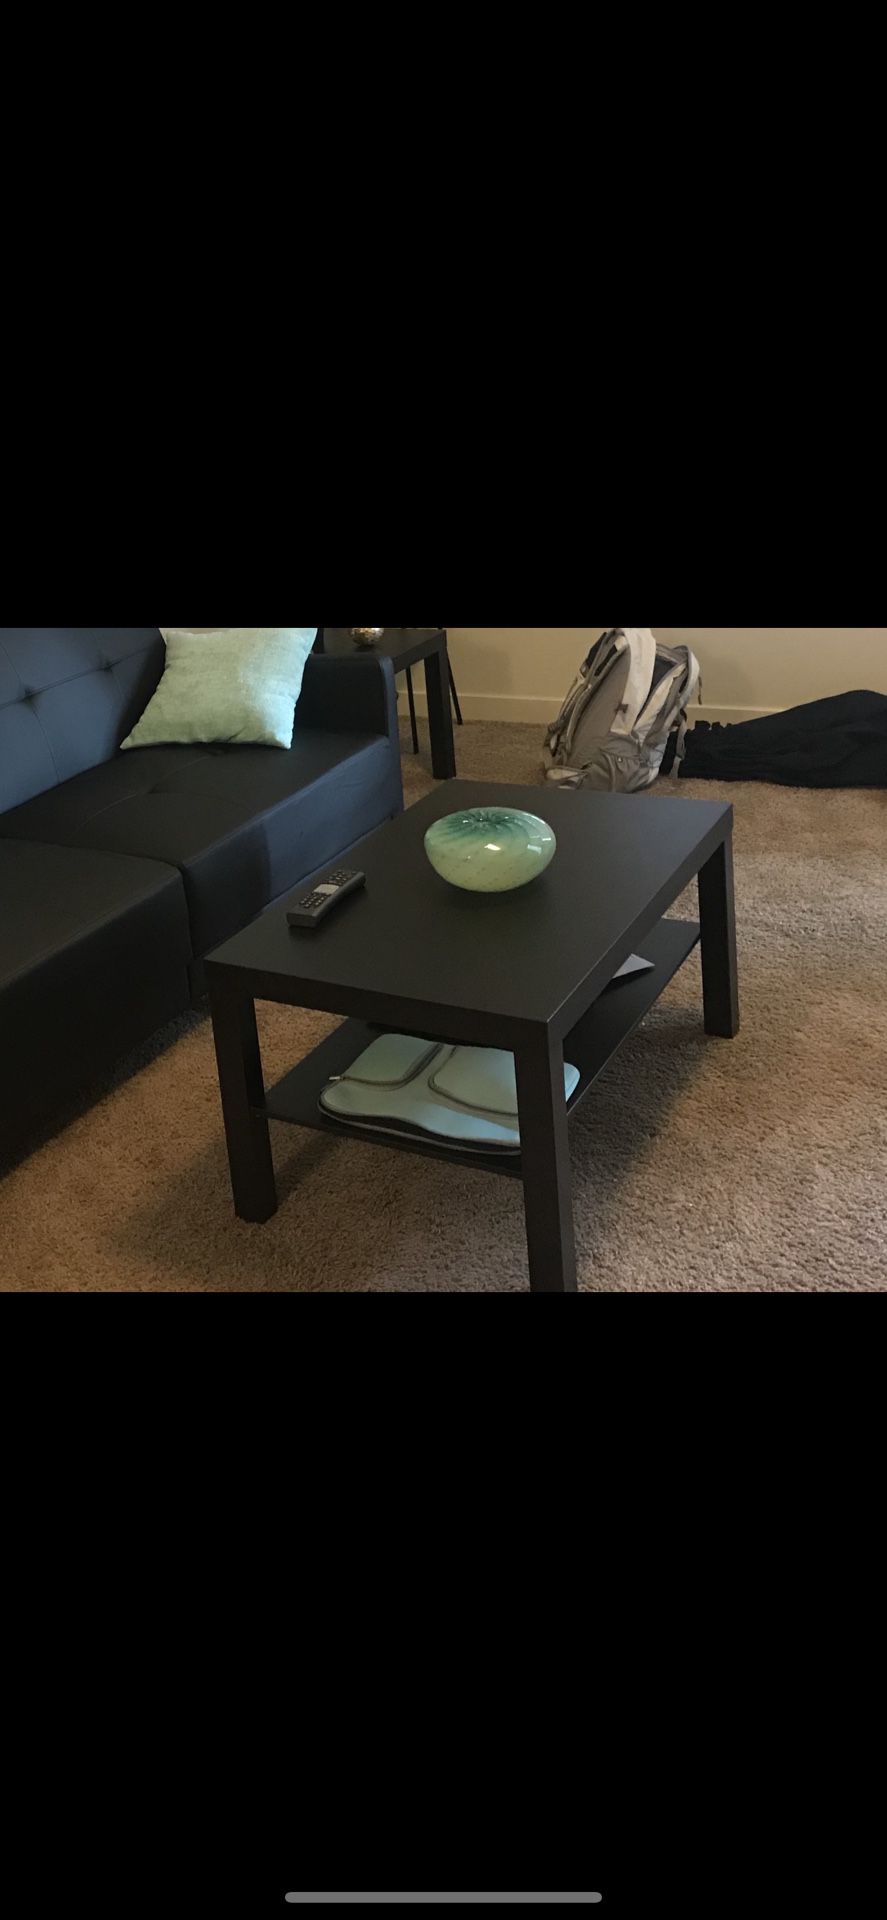 Ikea dining table with 2 chairs and coffee table